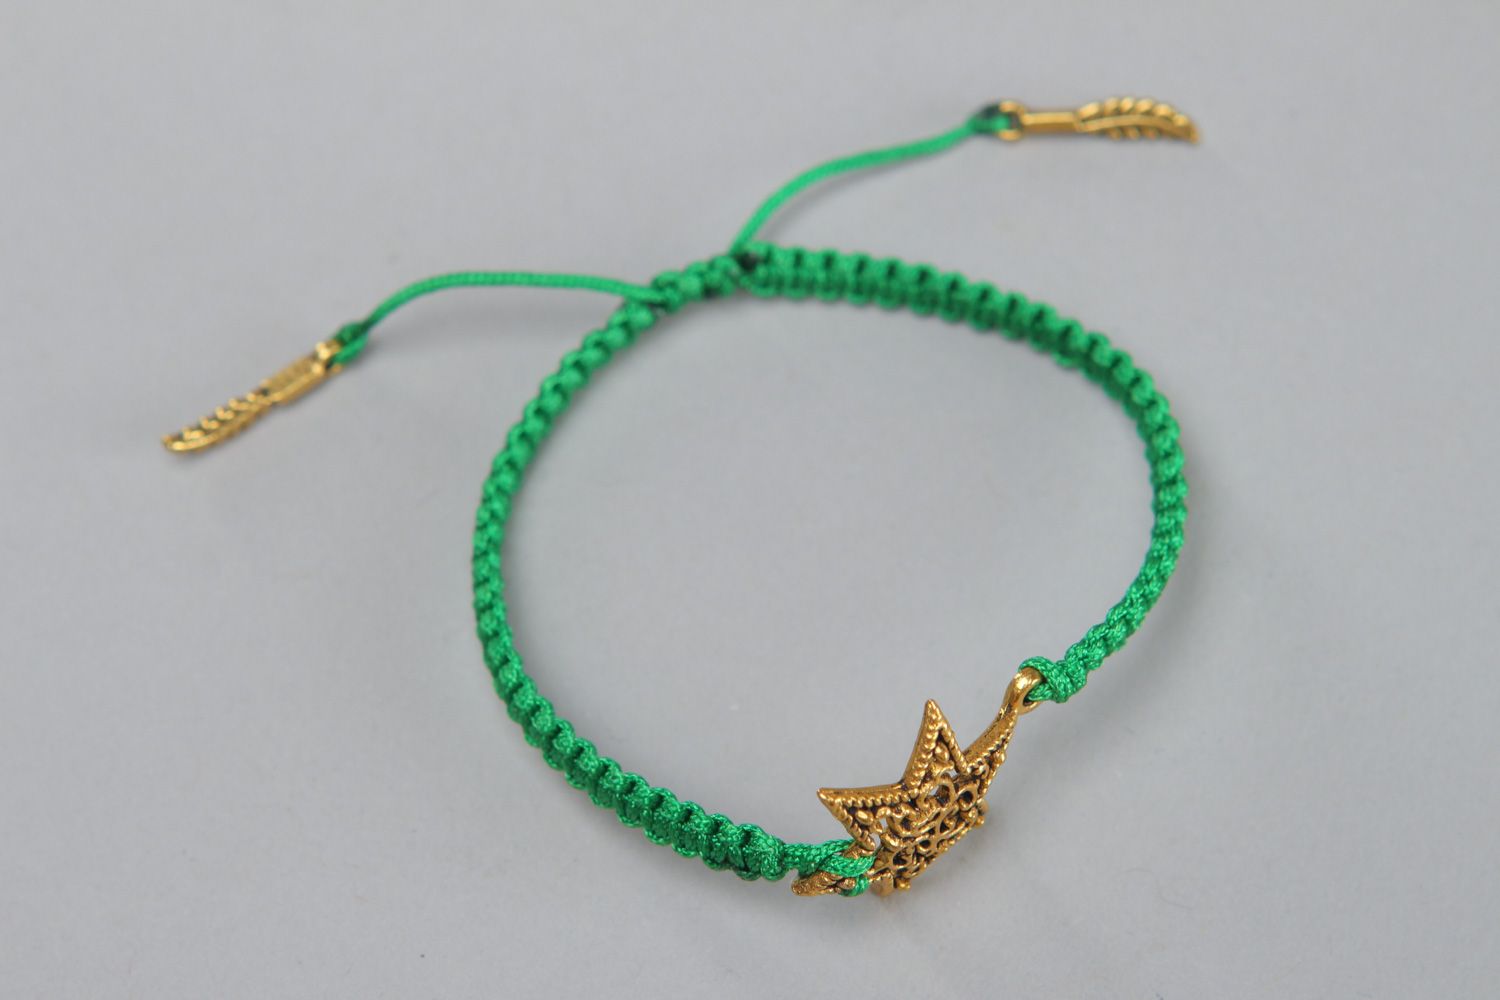 Handmade friendship bracelet woven of green cord with metal star for girls photo 2